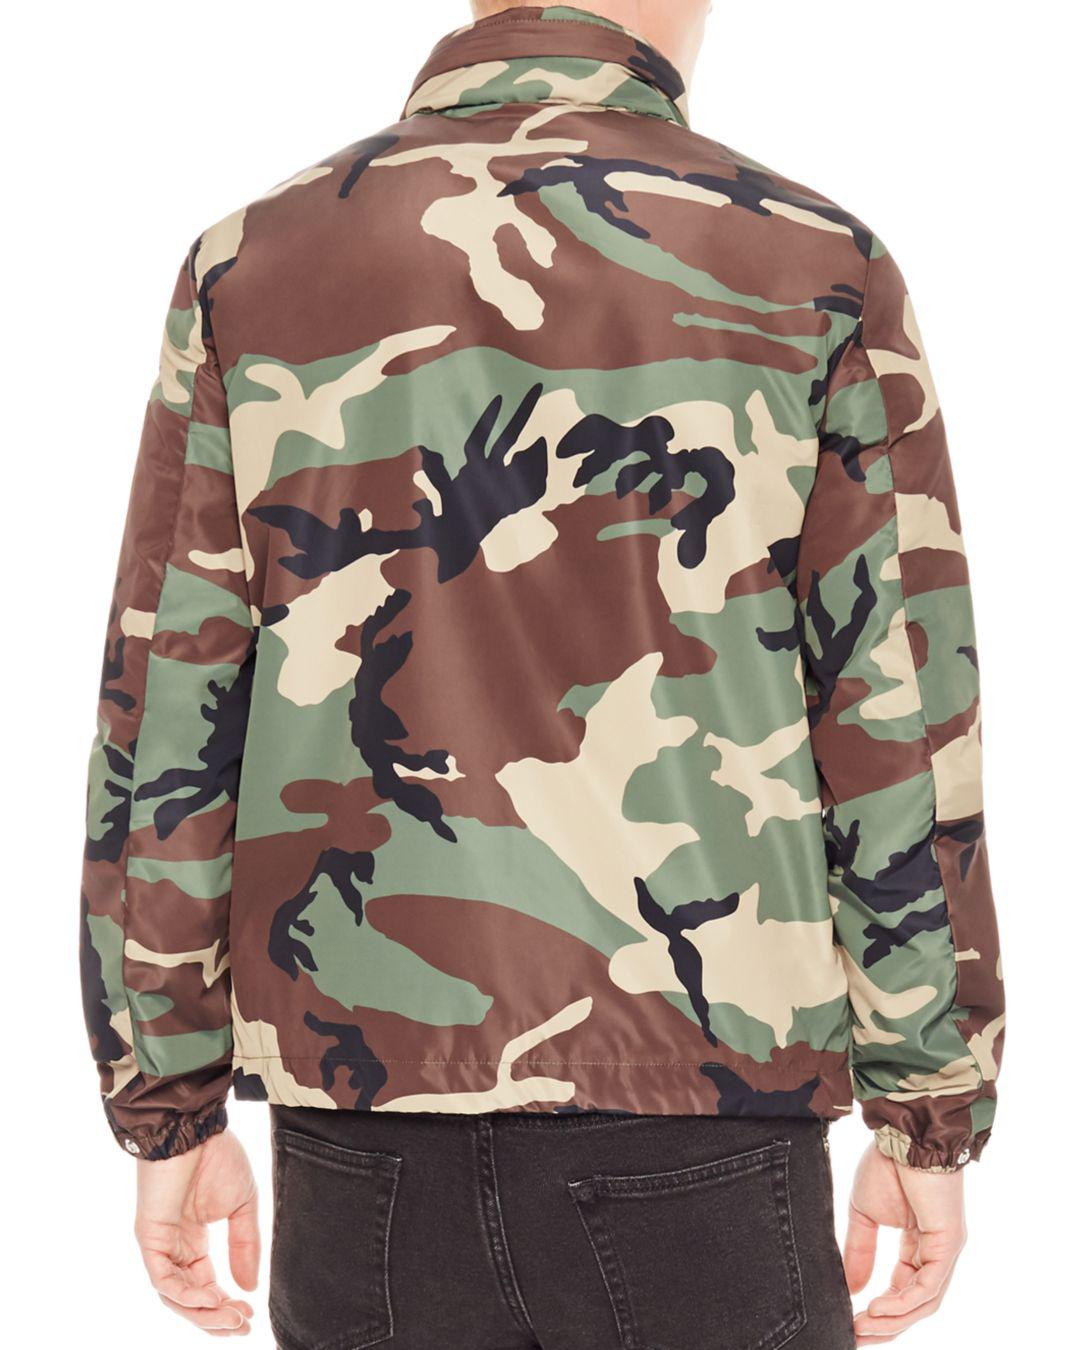 Sandro Electric Camo Jacket in Olive Green (Green) for Men - Lyst